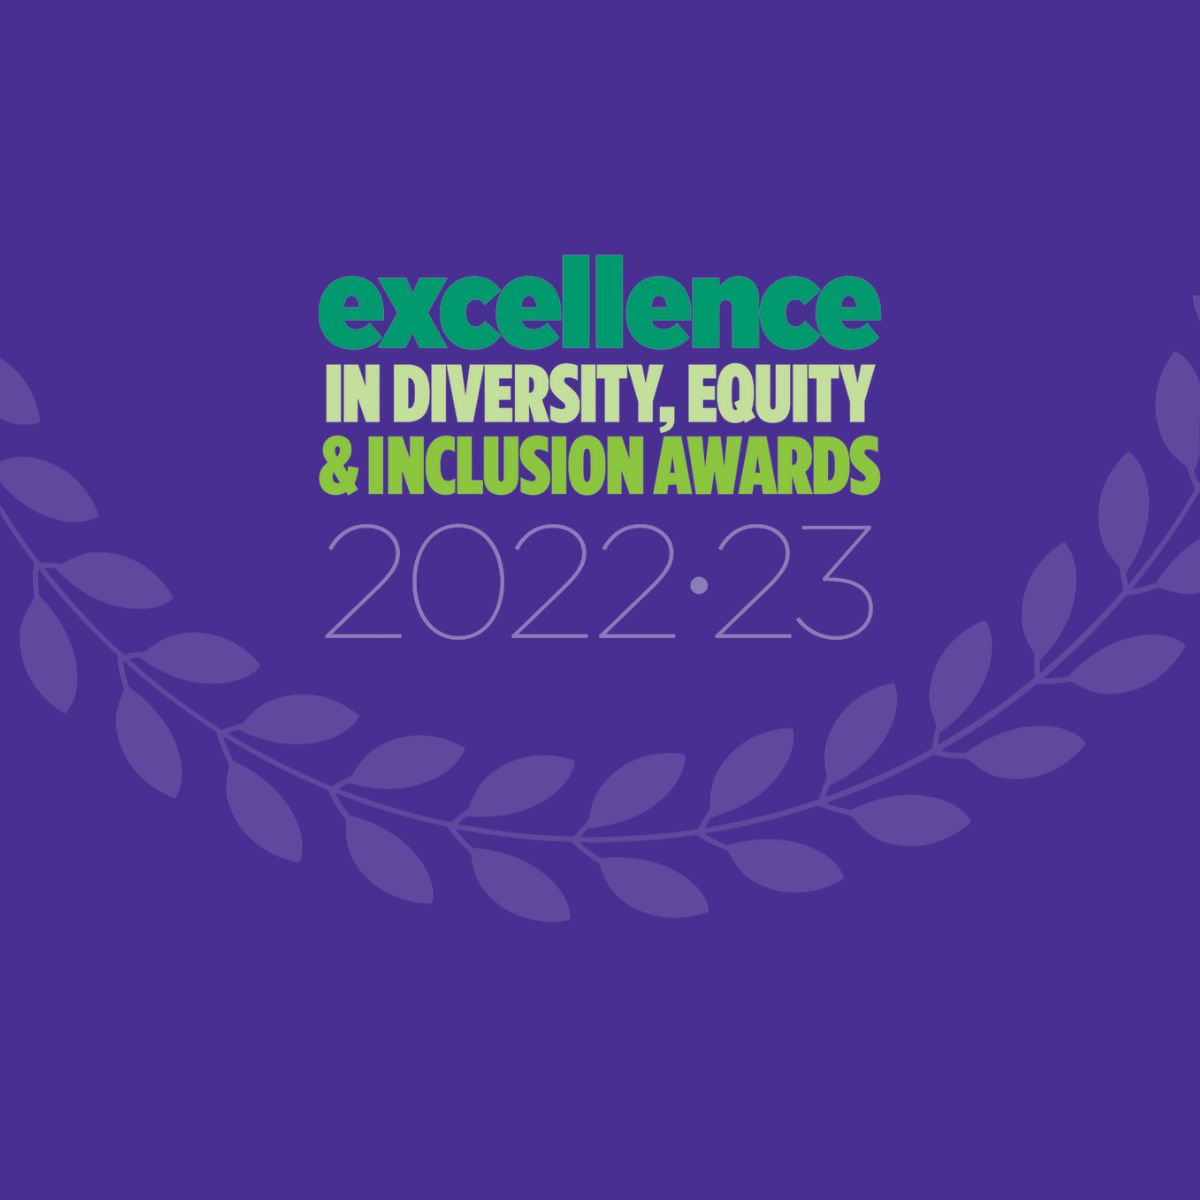 Excellence in Diversity, Equity and Inclusion Awards with Spartan statue in background and the logo of the Office for Institutional Diversity and Inclusion